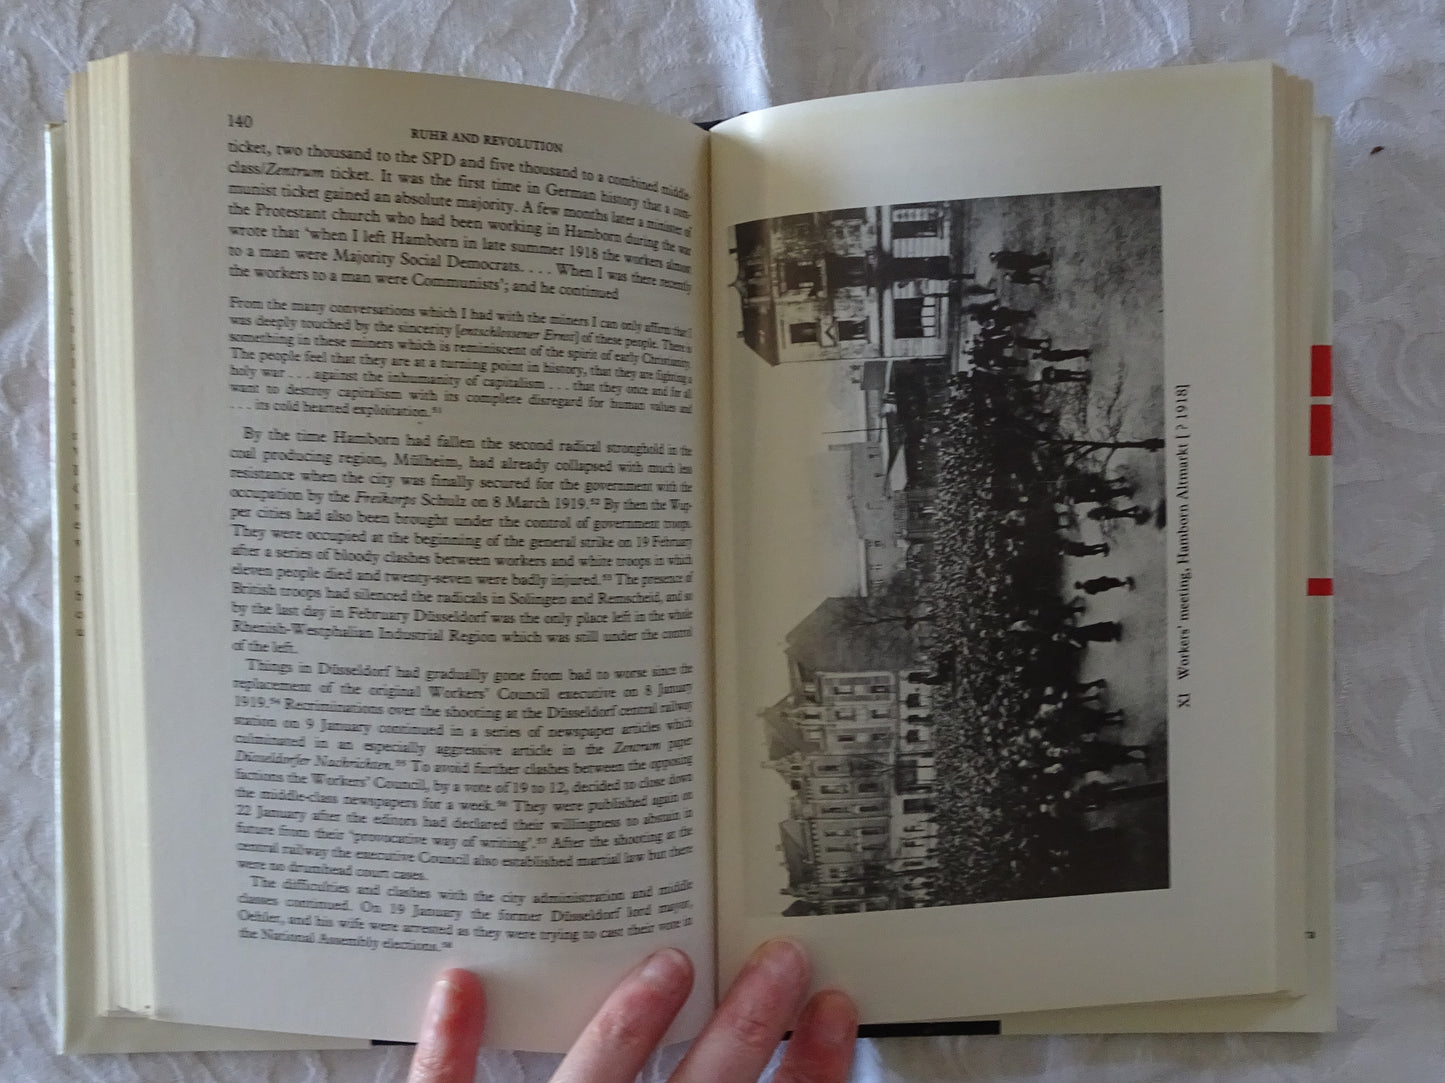 The Ruhr and Revolution by Jurgen Tampke